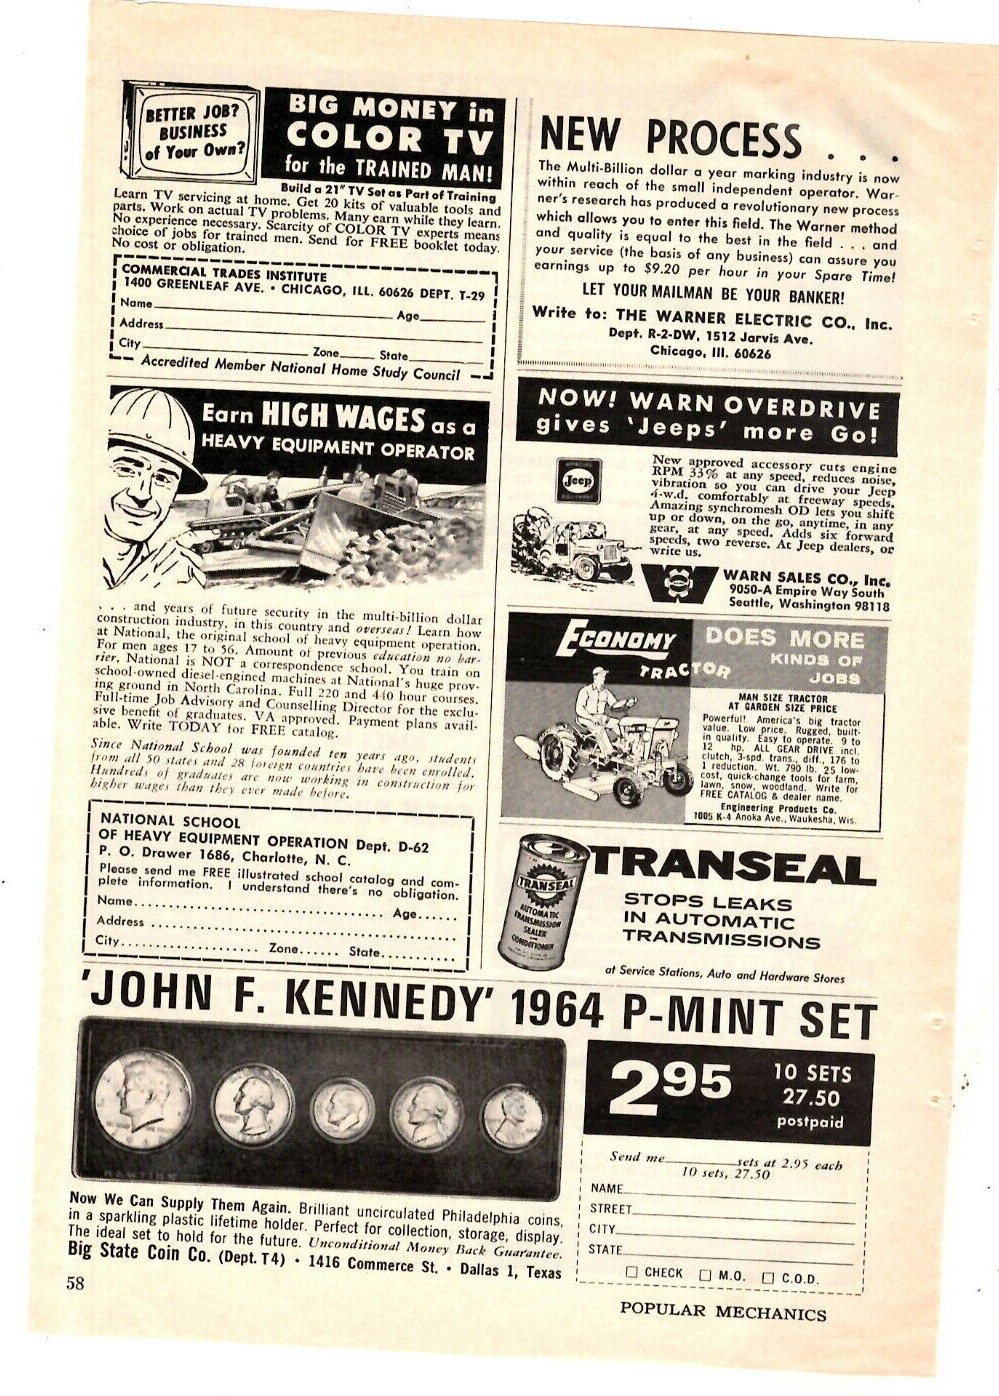 1965 Print Ad Economy Tractor Does More Kinds of Jobs 12 hp All Gear Drive Lawn